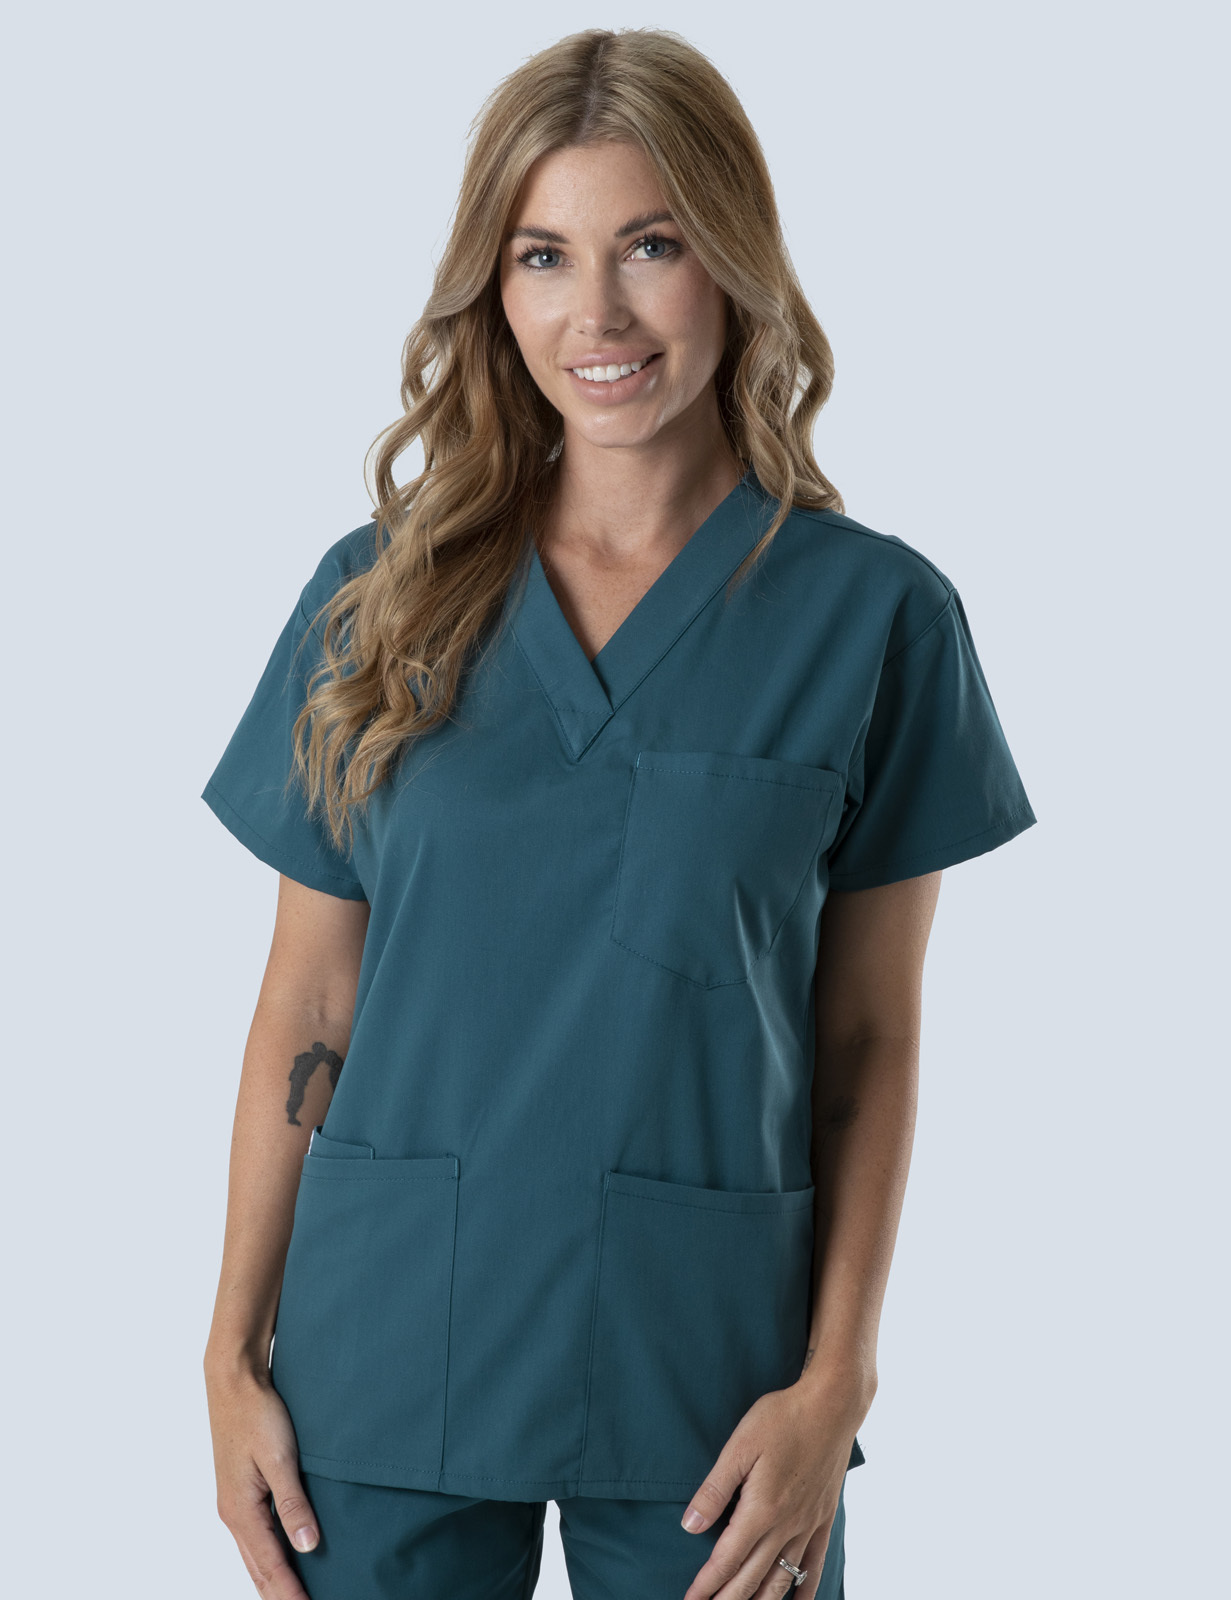 Ipswich Hospital Physiotherapist Uniform Top Only Bundle (4 Pocket Top in Caribbean incl Logos)